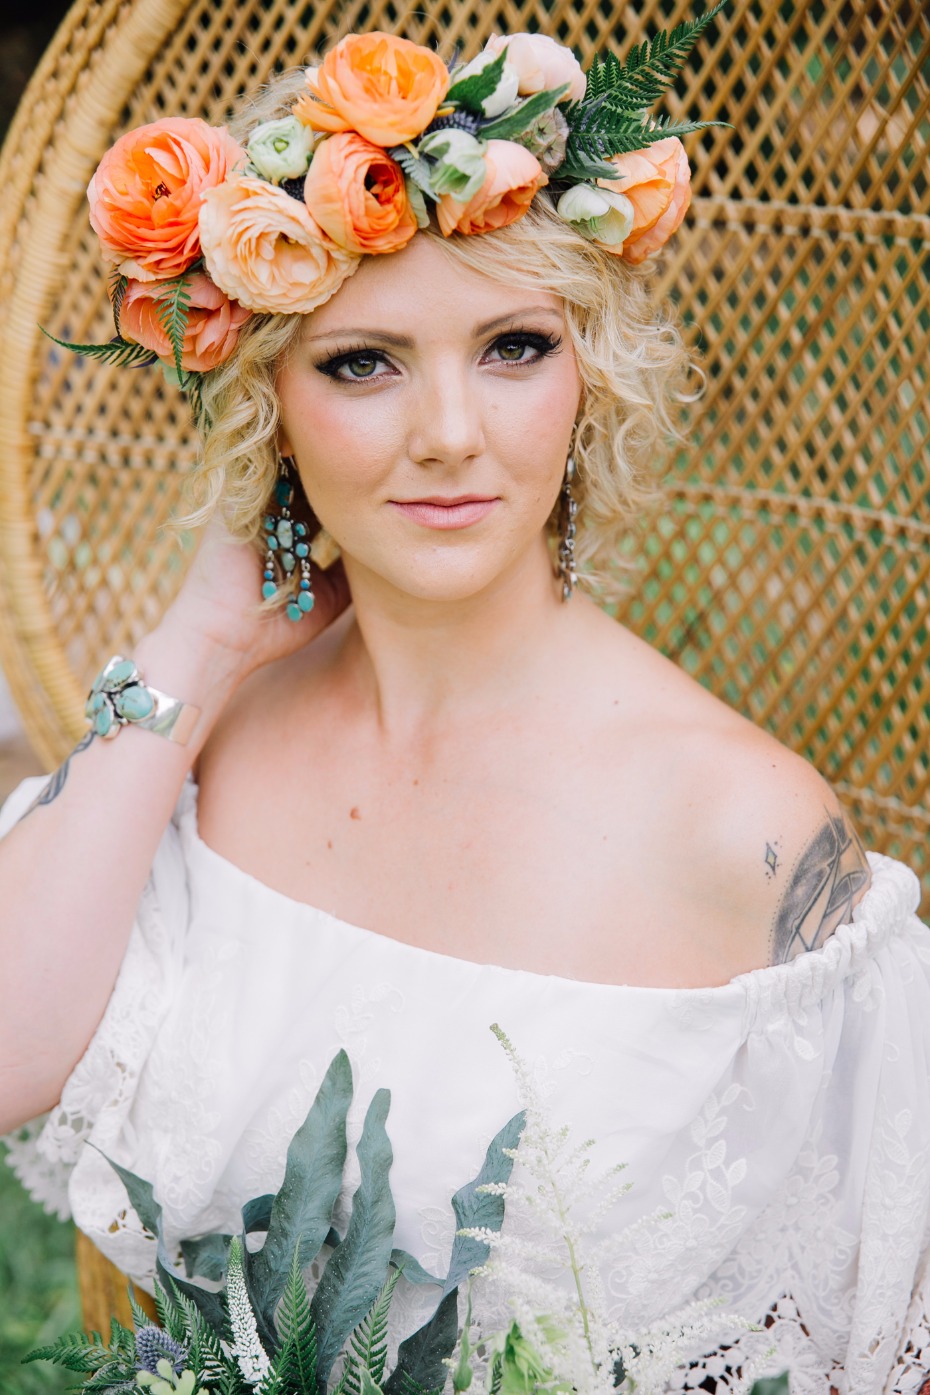 Gorgeous floral crown for the boho bride